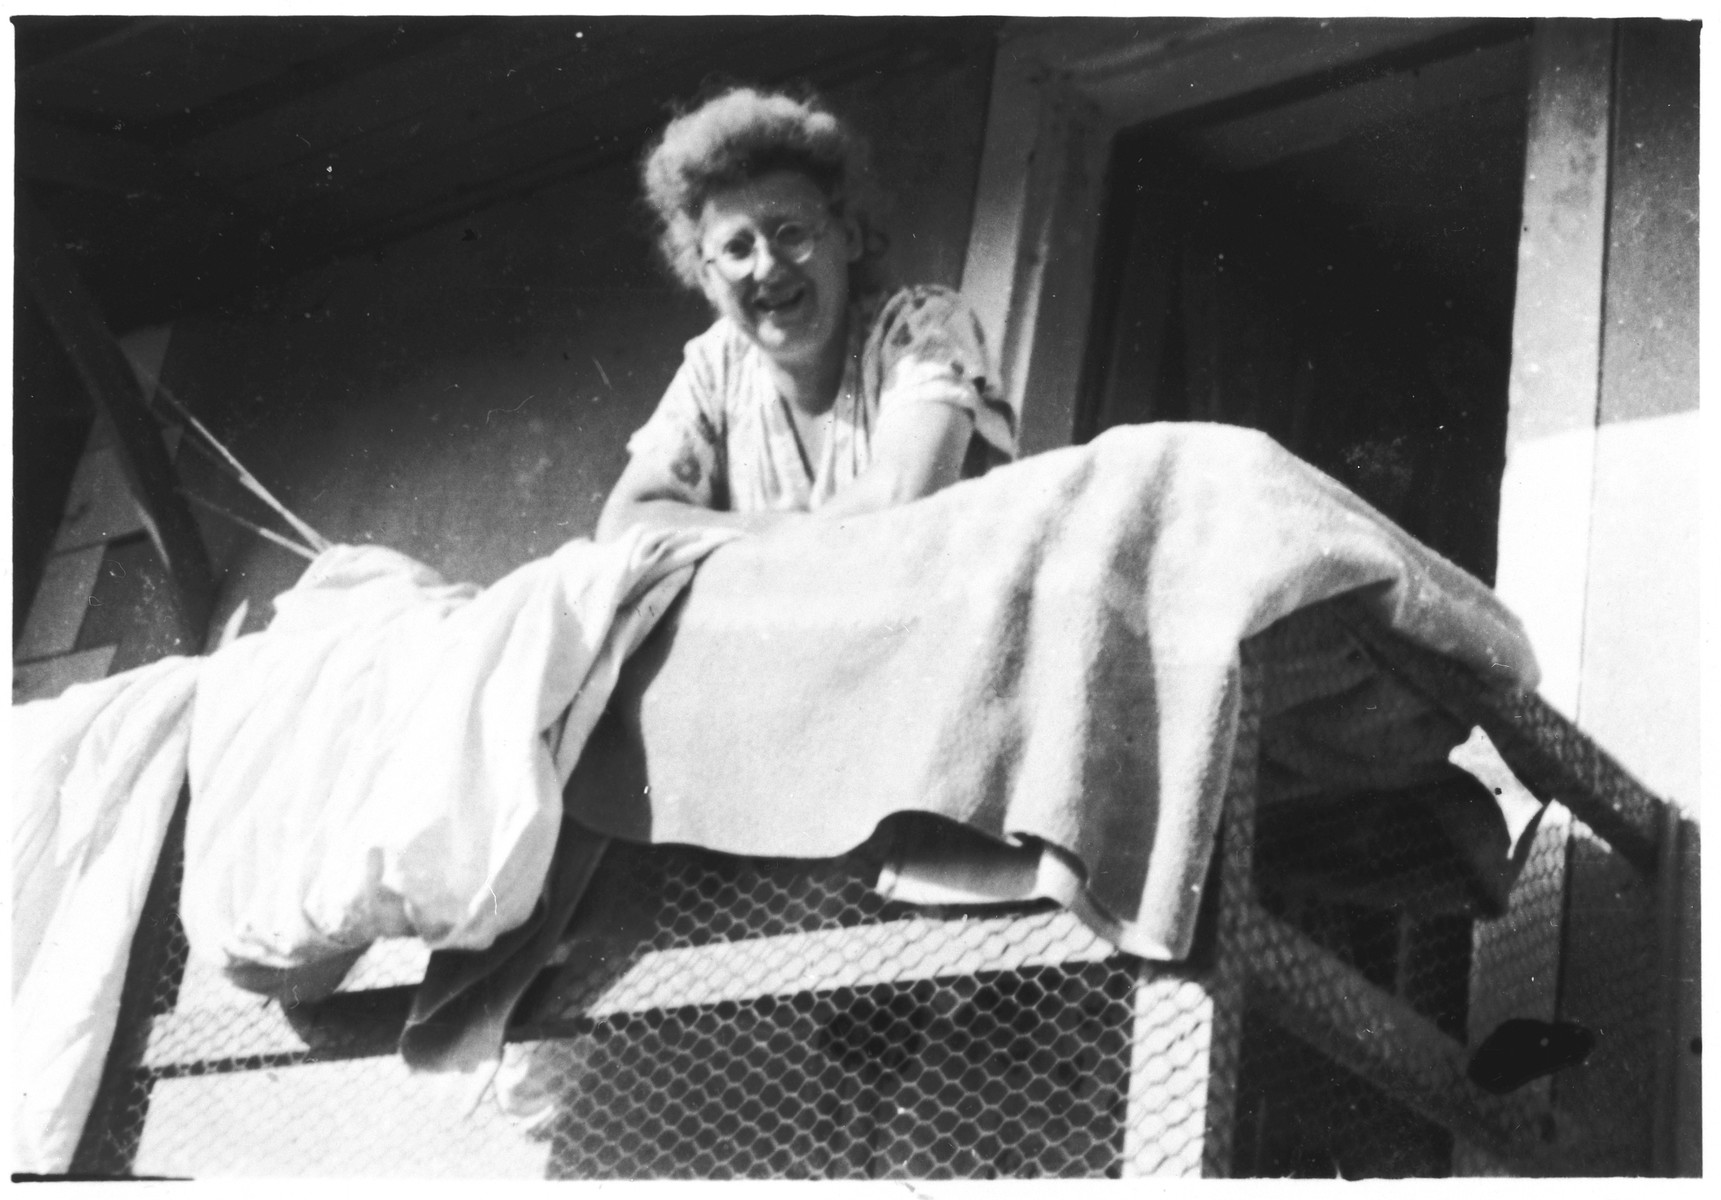 Jeanne Latchiver, a Jewish woman who worked closely with the Armée Juive, poses on the balcony of the mountain chalet in Les Michallons that was used as a training camp by the Jewish resistance group.